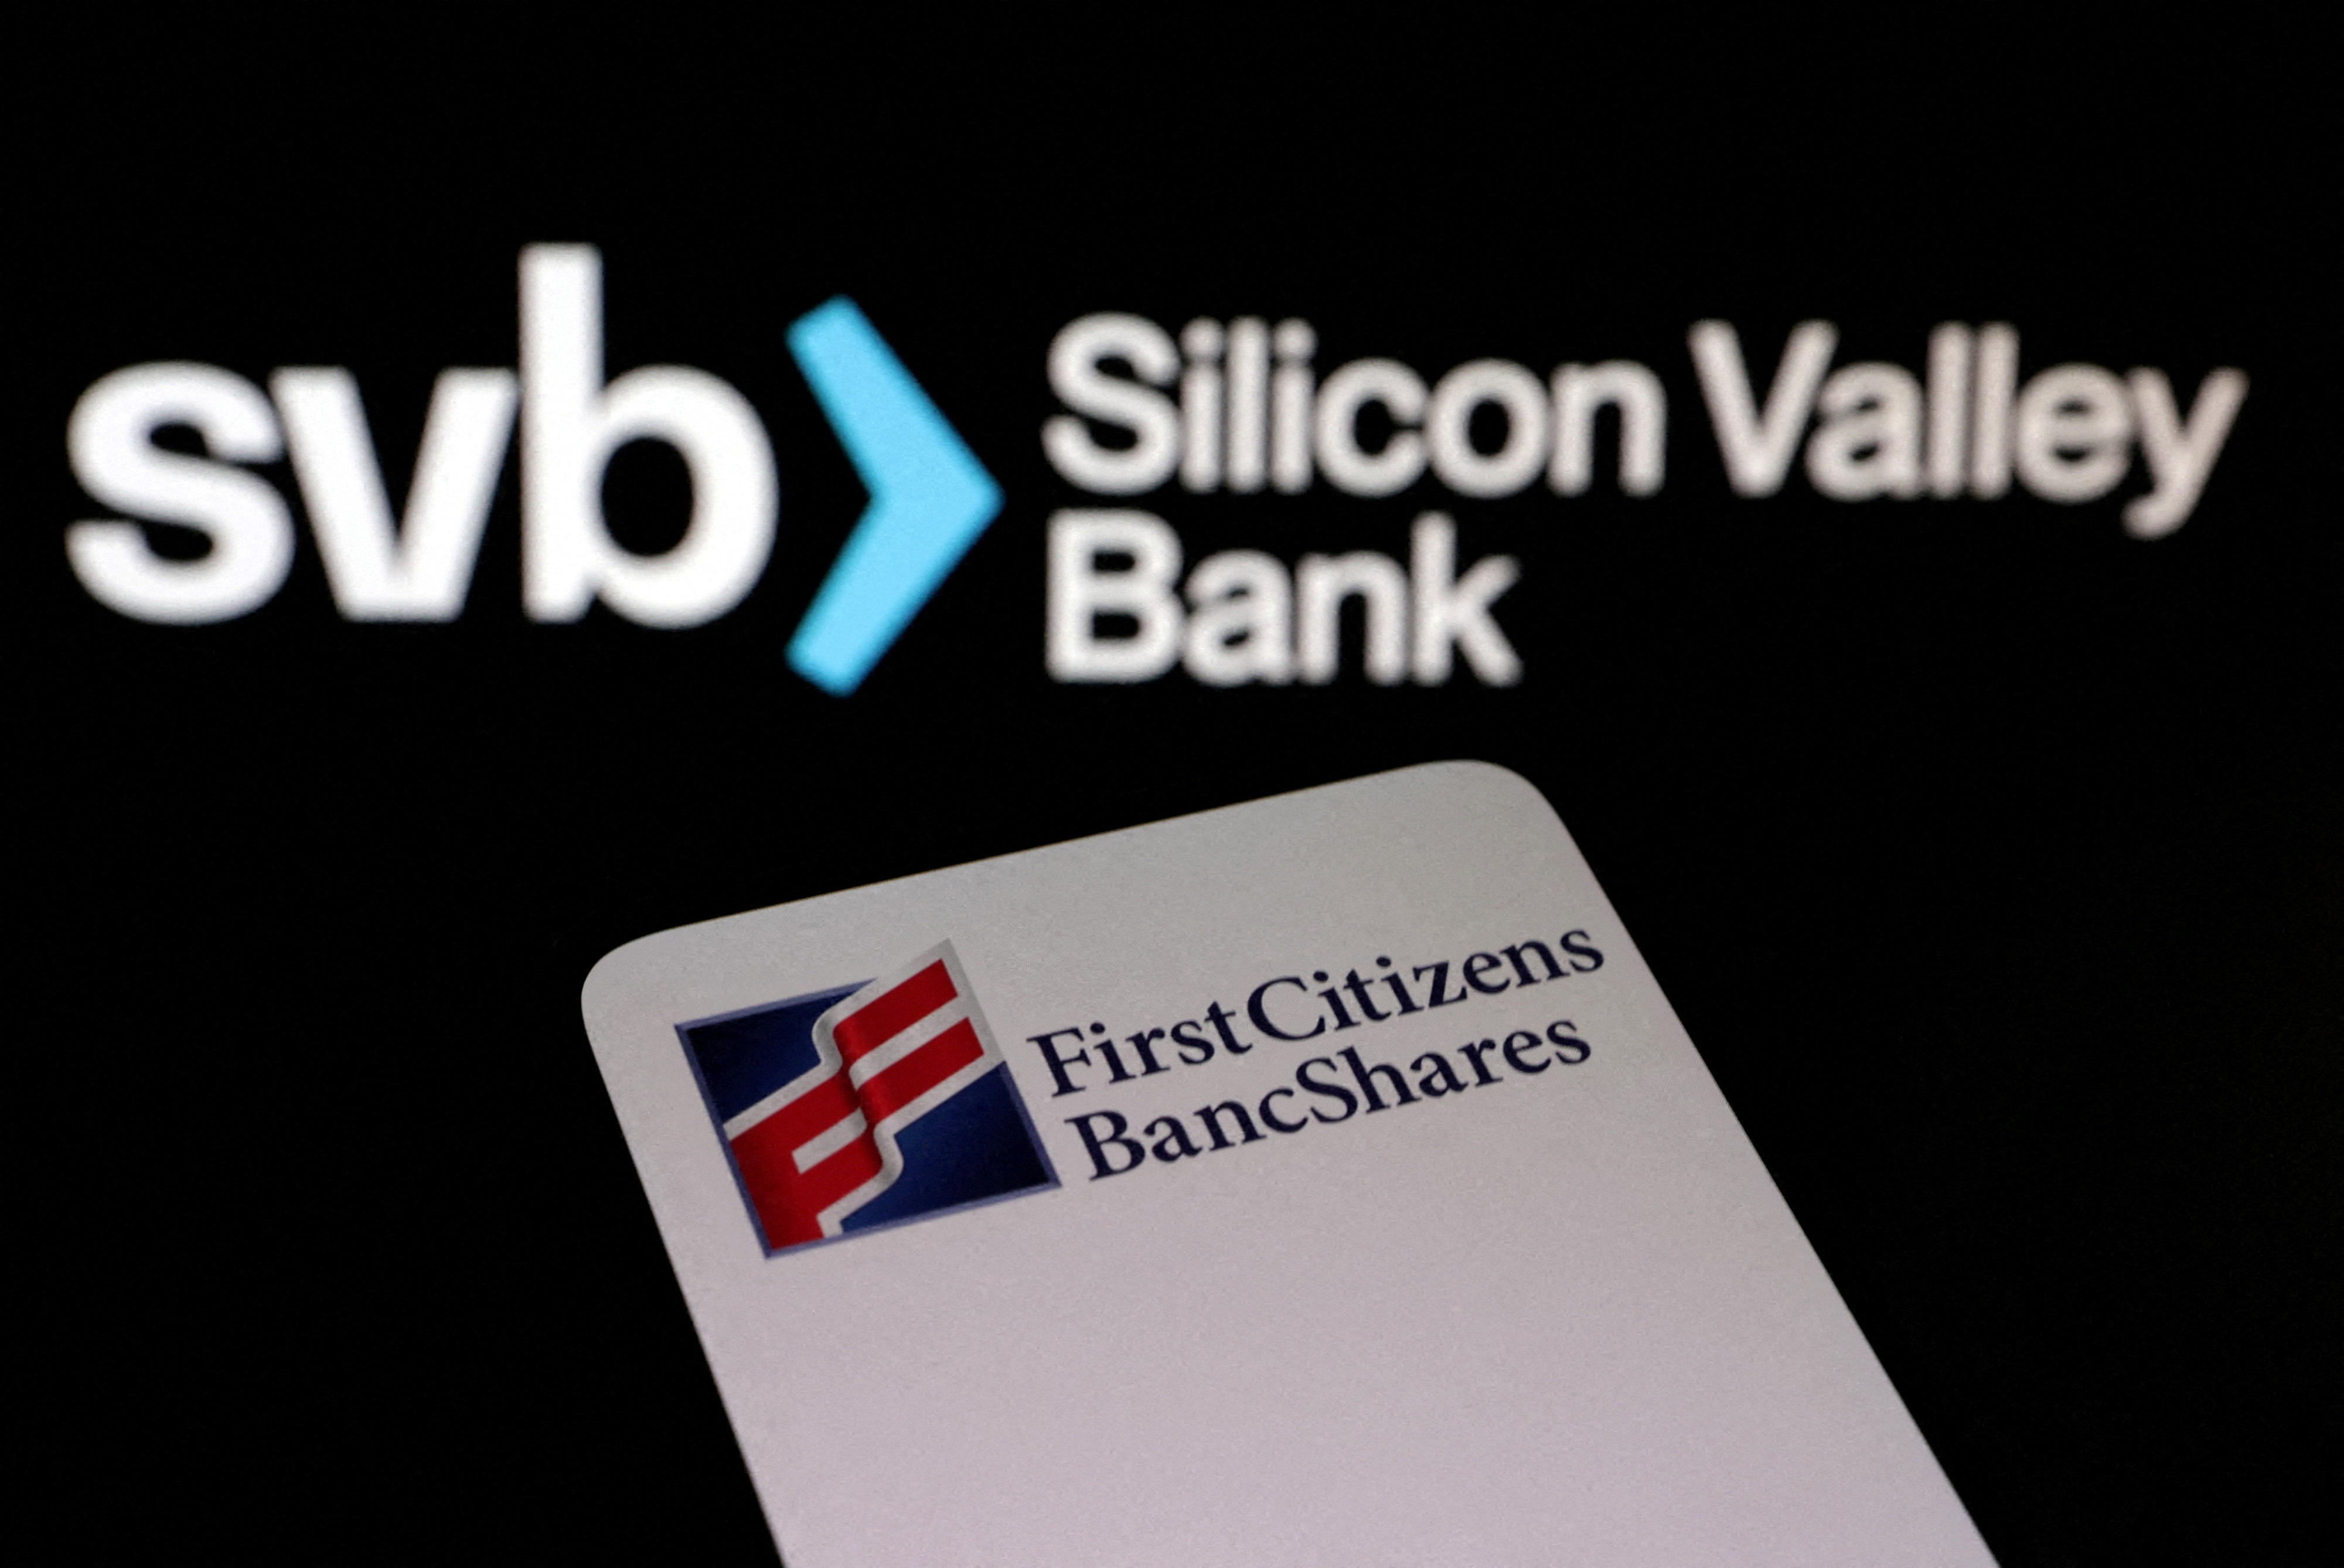 Illustration shows First Citizens BancShares and SVB (Silicon Valley Bank) logos